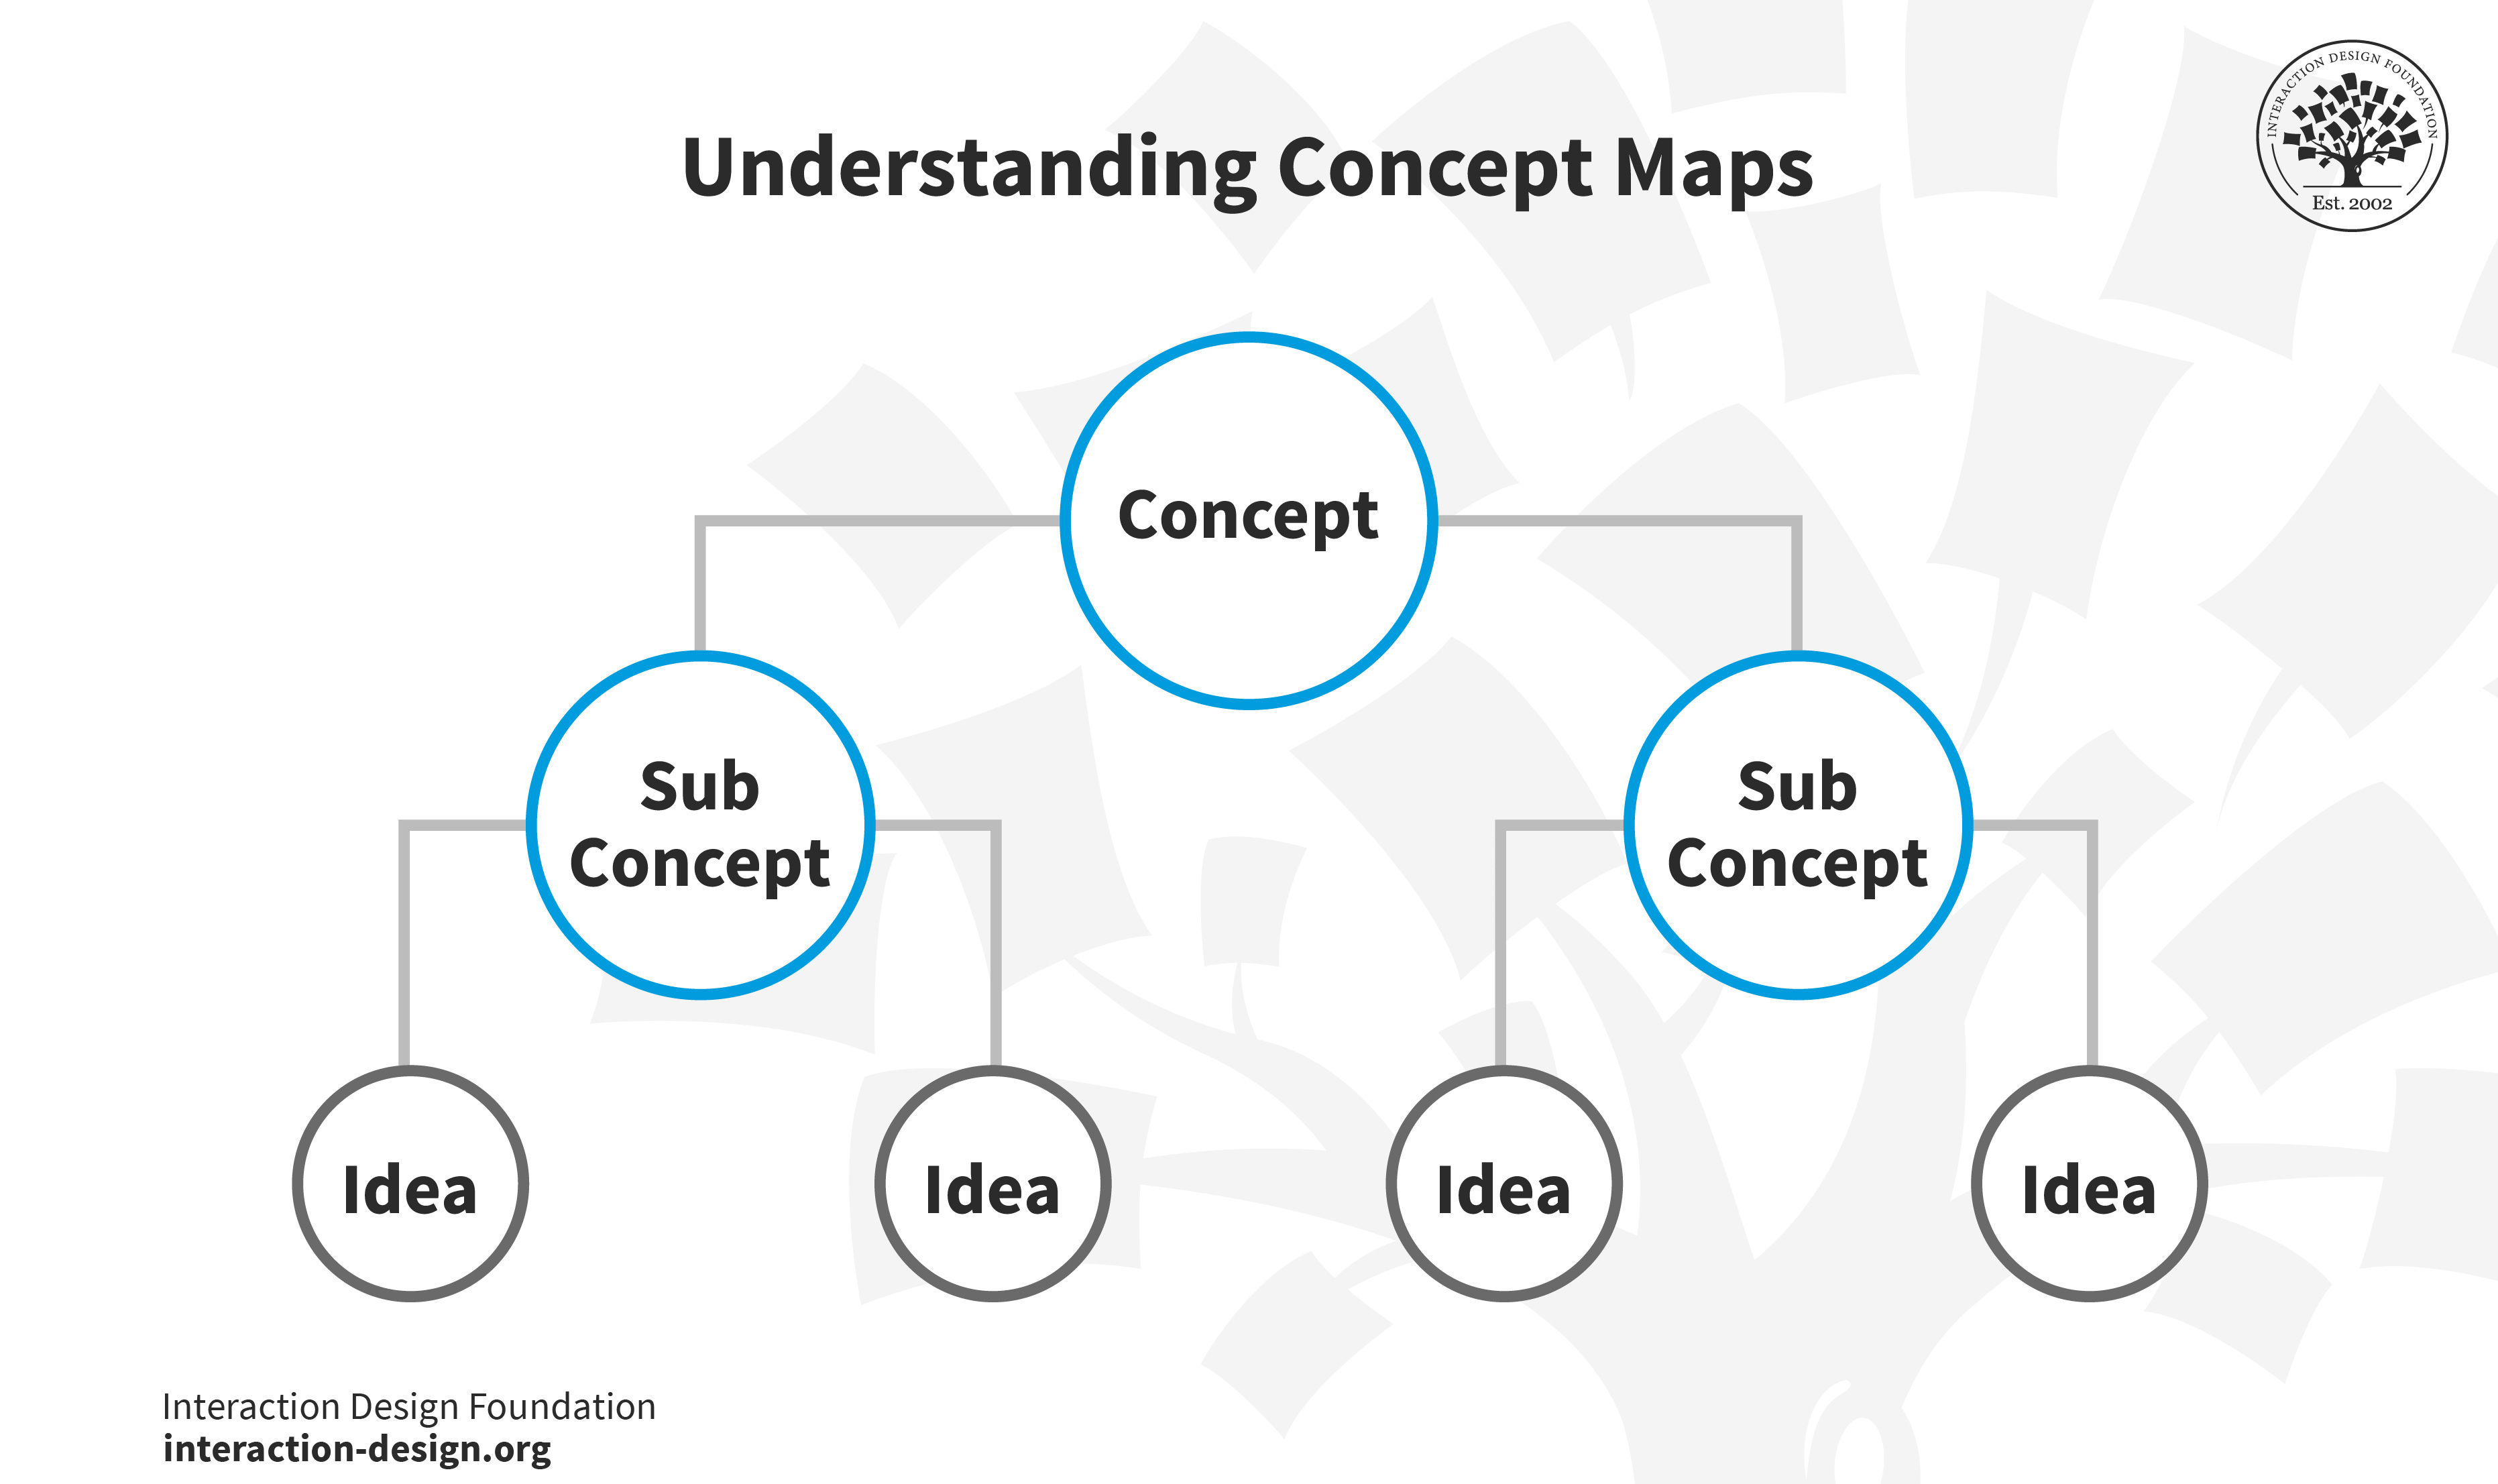 A concept map showcasing sub-concepts and ideas.